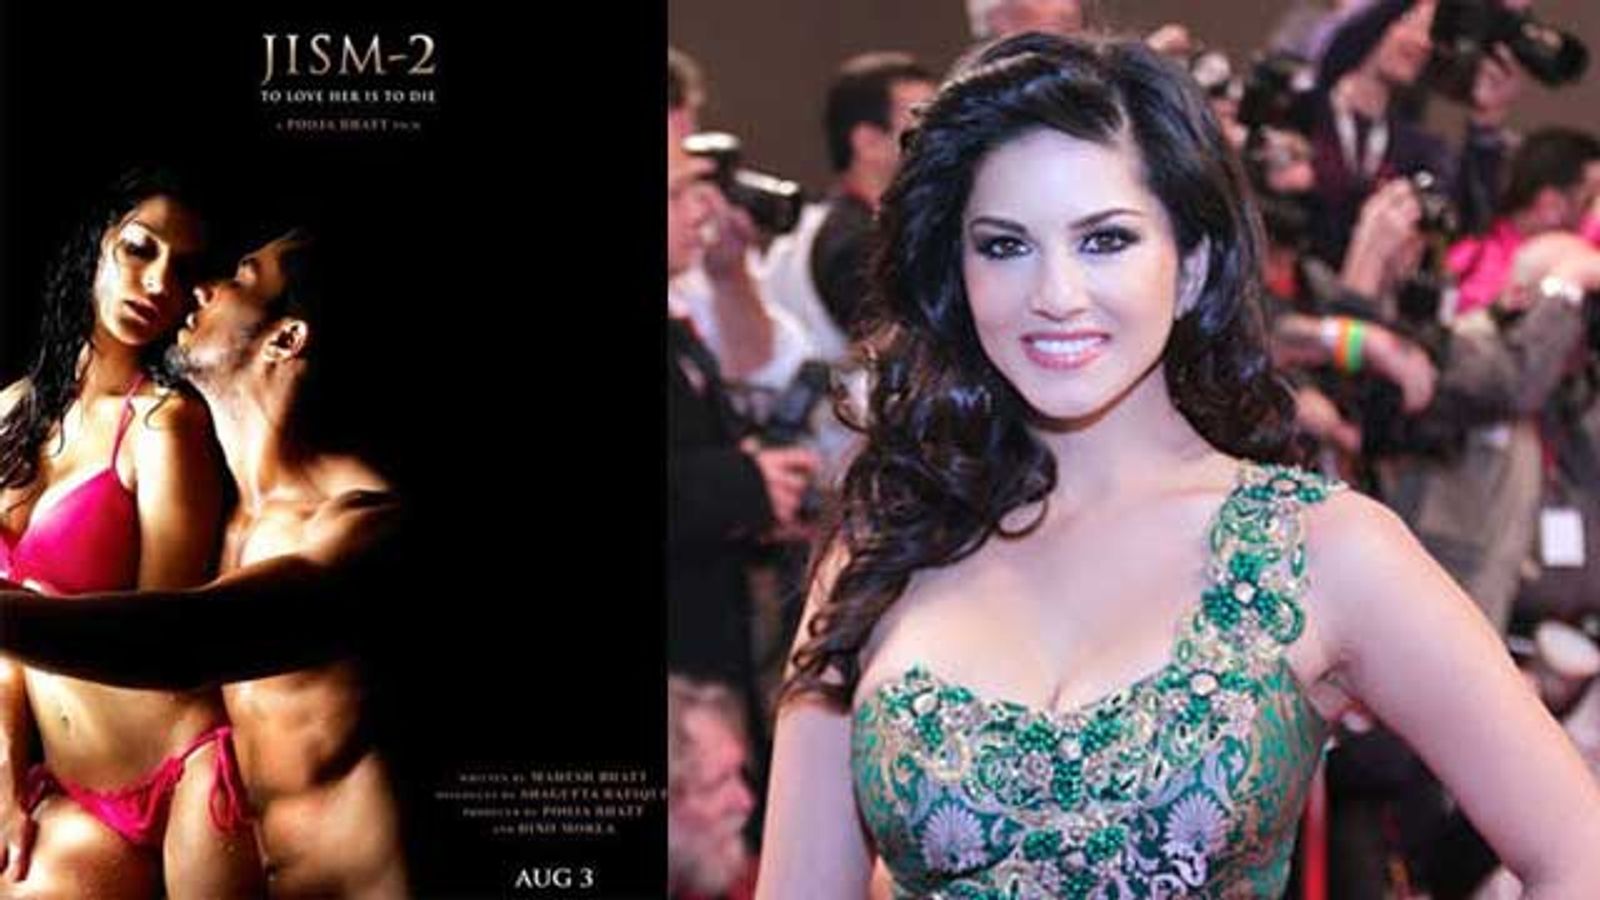 'Jism 2' Starring Sunny Leone Opens Today in India